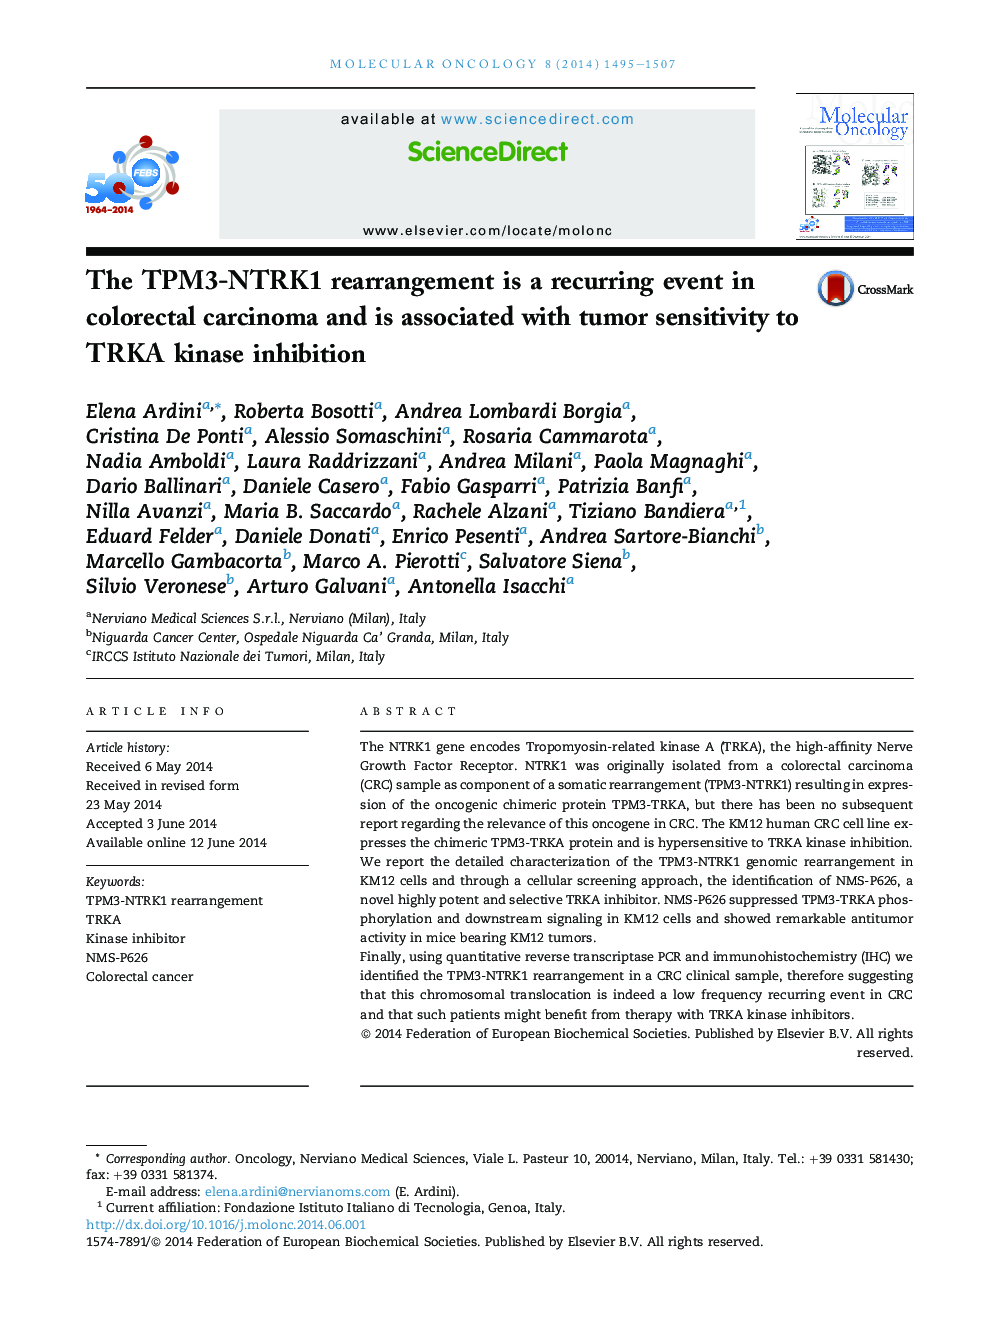 The TPM3-NTRK1 rearrangement is a recurring event in colorectal carcinoma and is associated with tumor sensitivity to TRKA kinase inhibition